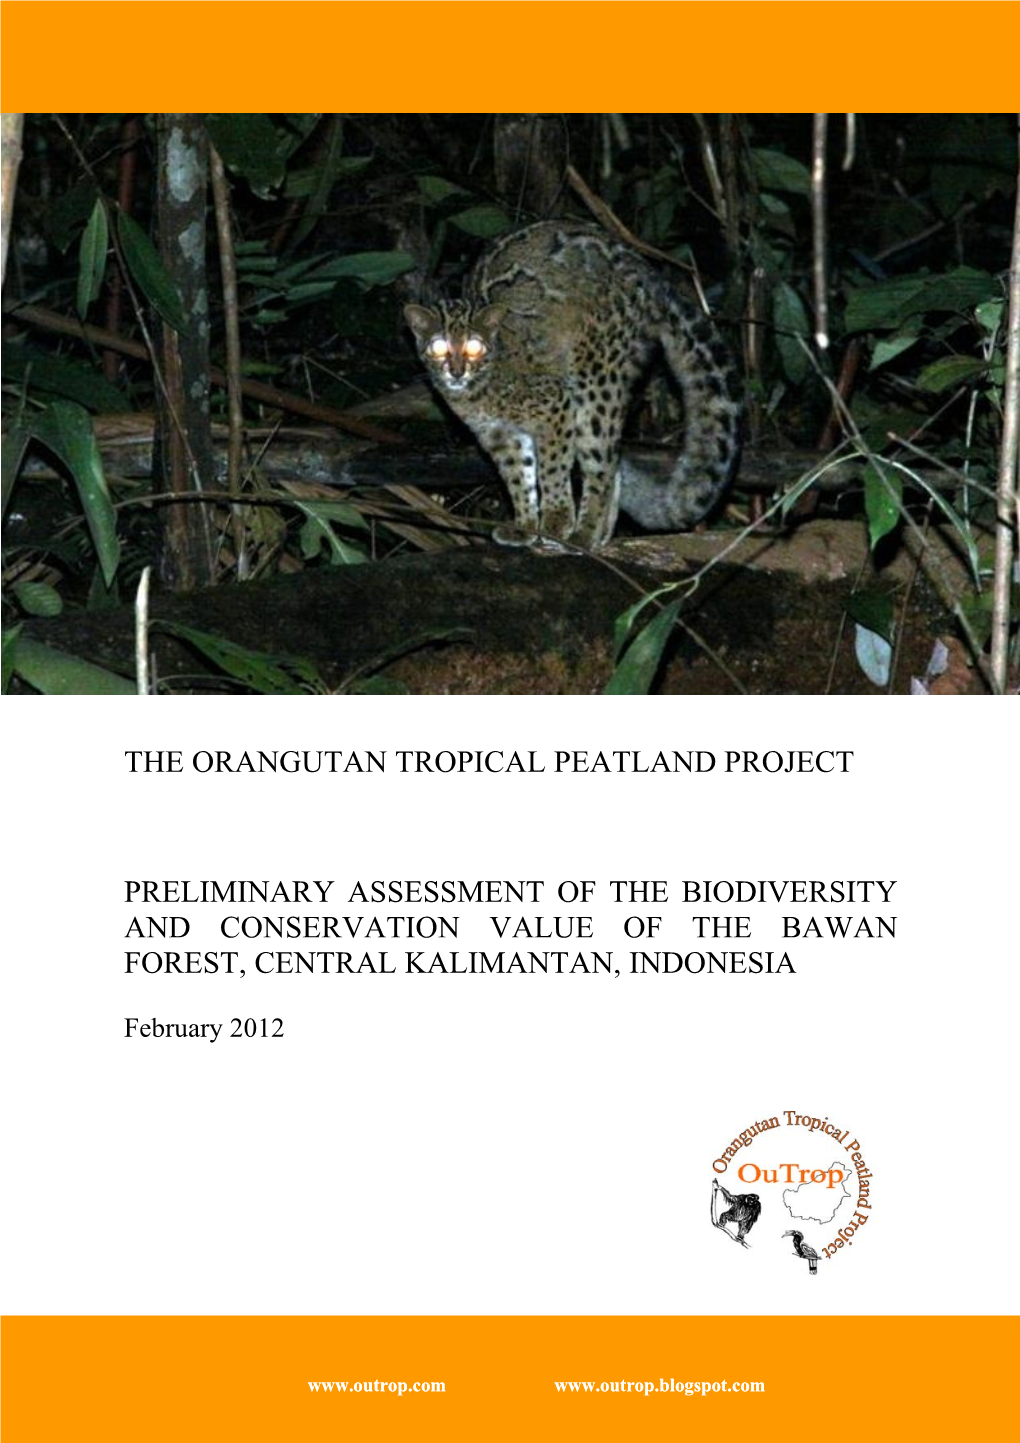 Preliminary Assessment of the Biodiversity and Conservation Value of the Bawan Forest, Central Kalimantan, Indonesia